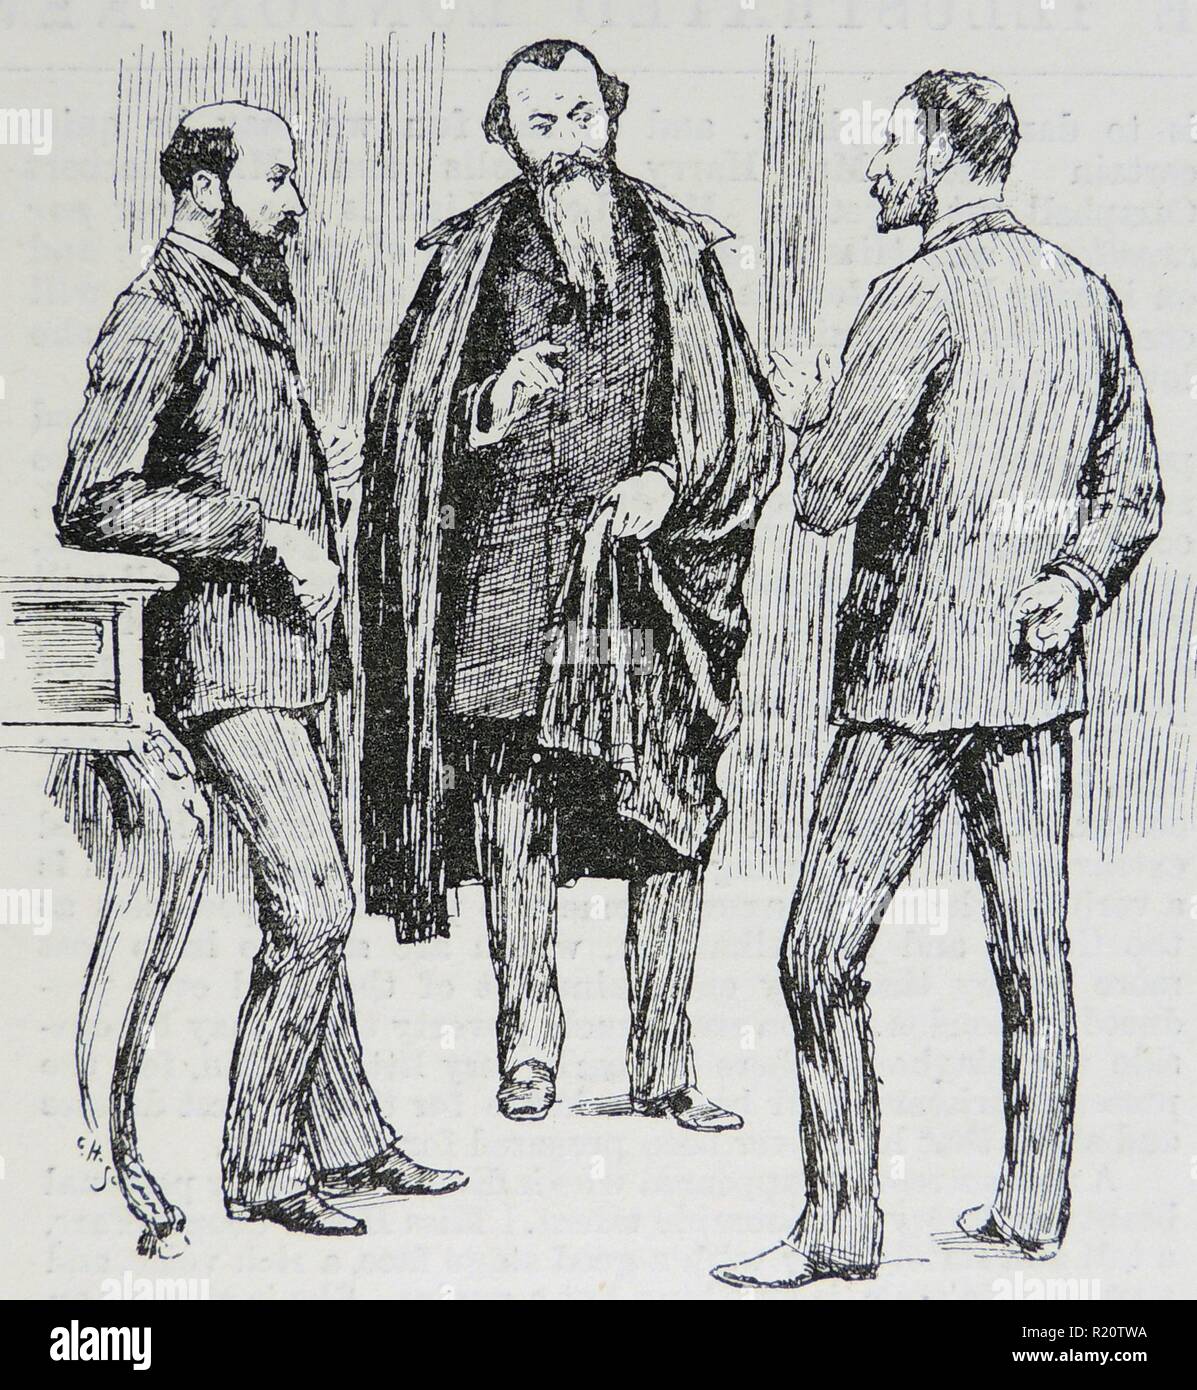 Personal physicians to Crown Prince Frederick of Prussia (1831-1888). Doctors Braumann, Dettweiler and Krause in San Remo discussing the Prince's illness - cancer of the larynx - December 1887. Stock Photo